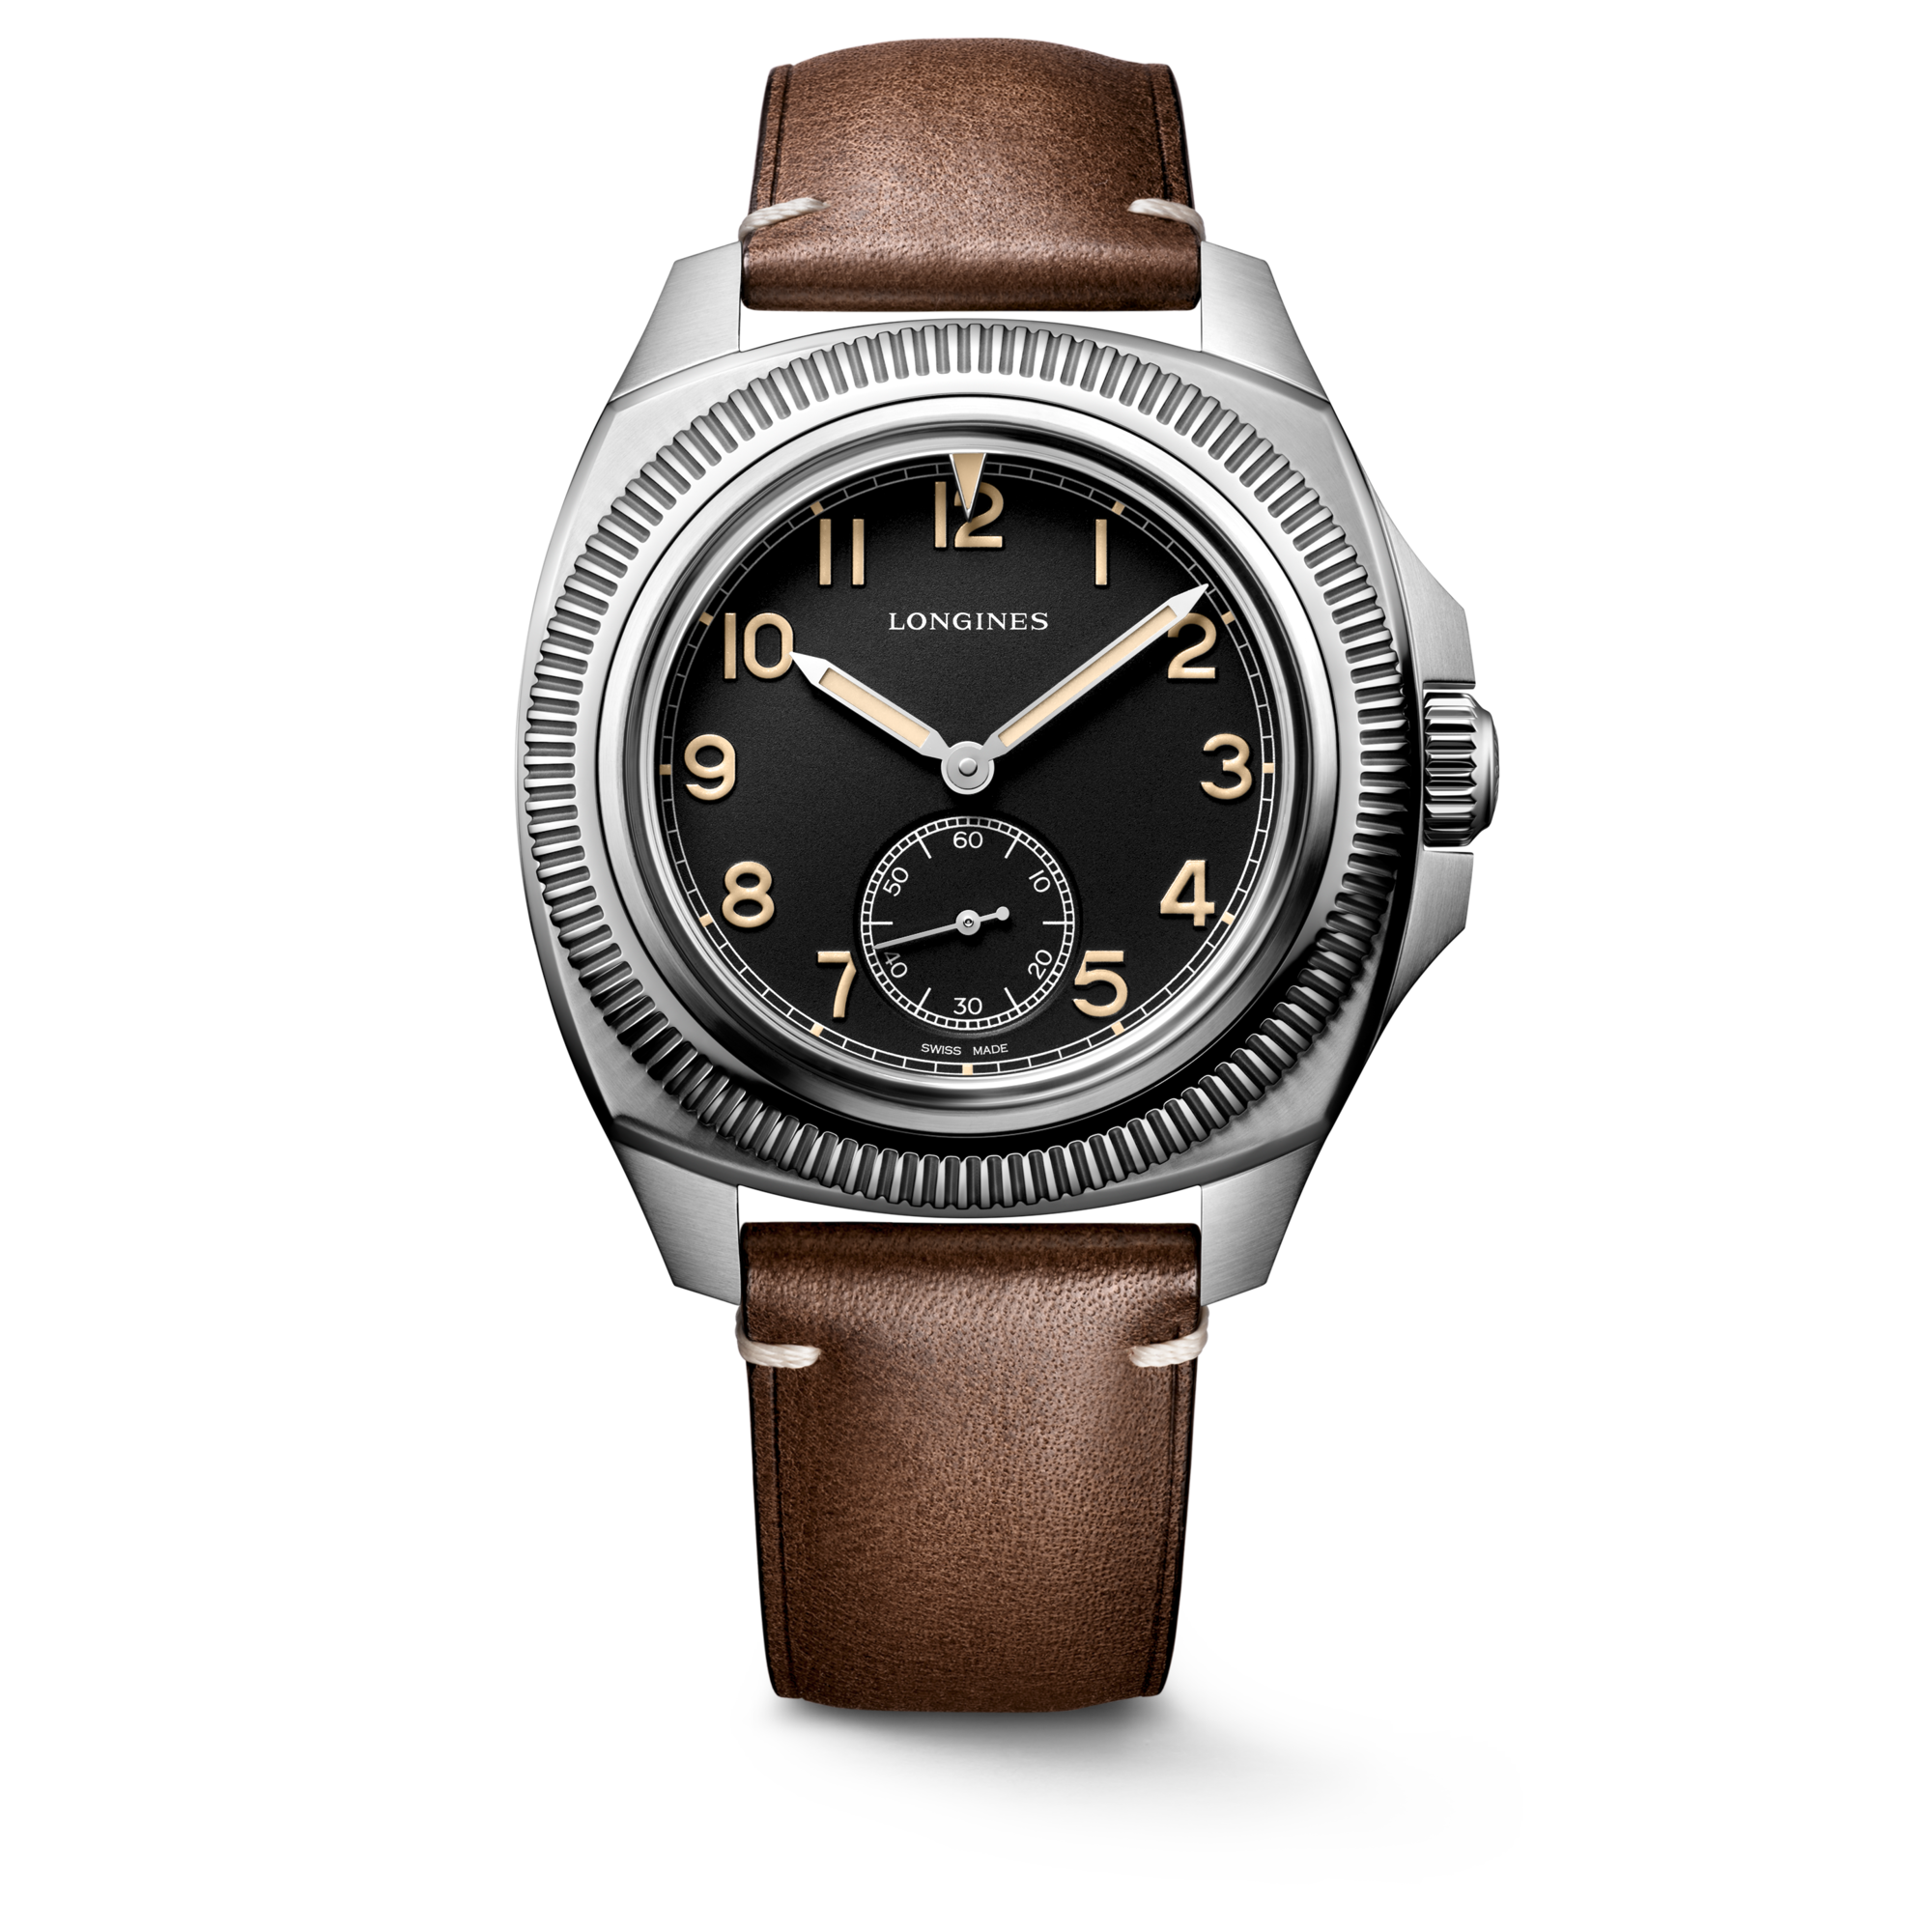 THE LONGINES AVIGATION WATCH TYPE A-7 stainless steel